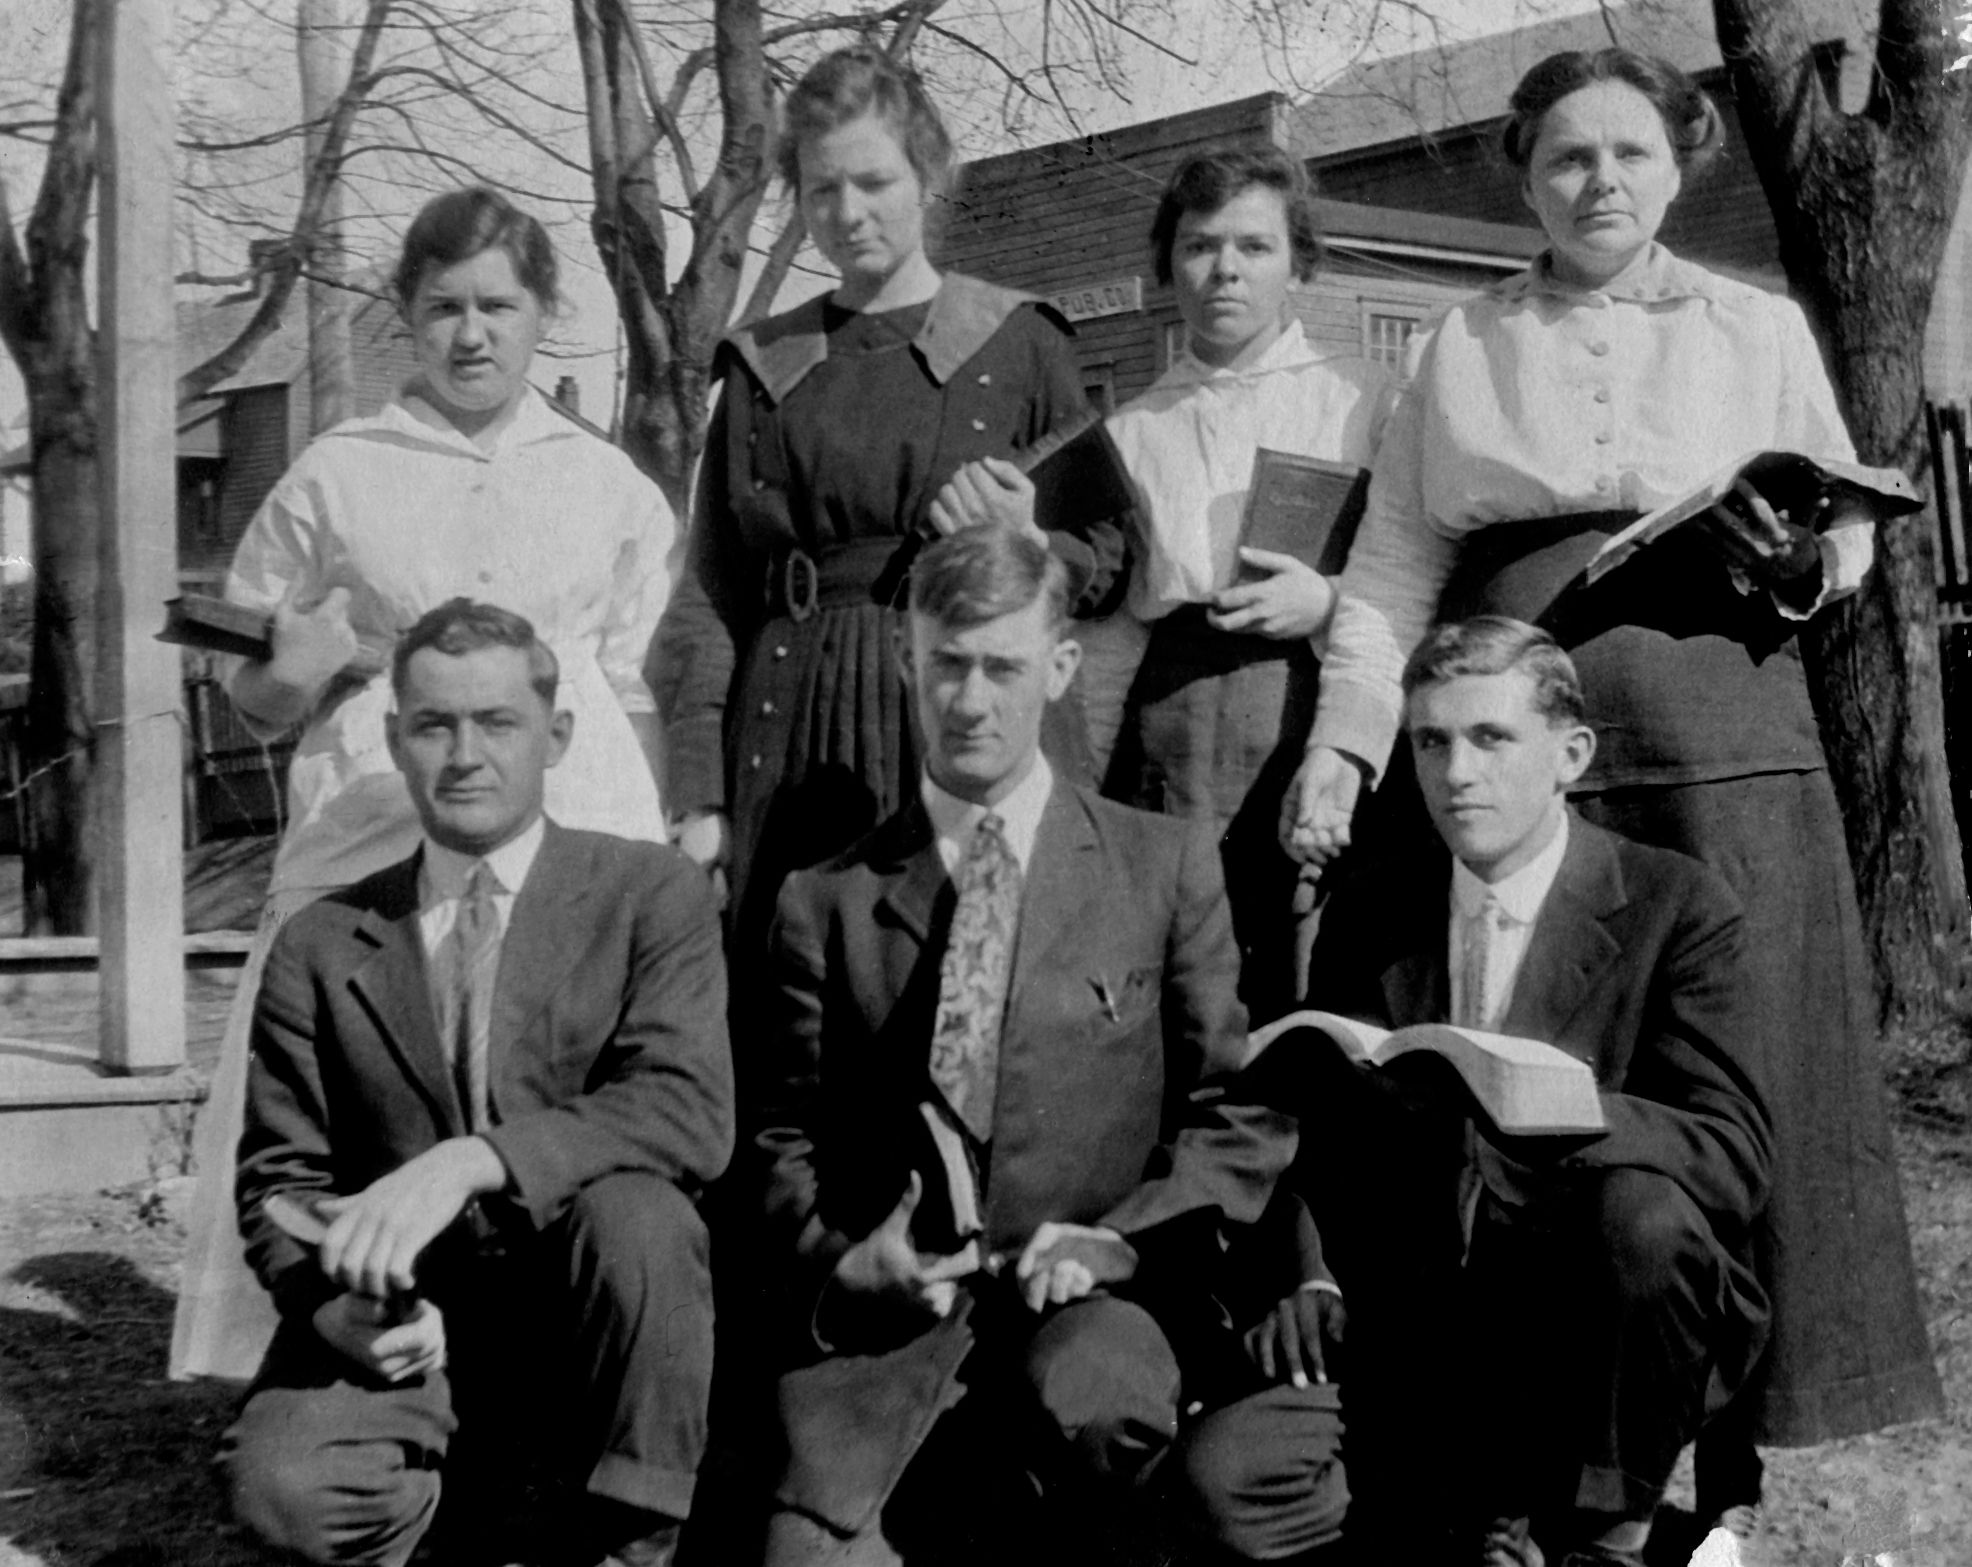 (back, from left) Bertha Hilbun, Nannie Hagewood, Lillie Mae Wilcox, and teacher Nora Chambers; (front, from left) Jesse Danehower, Earl Hamilton, and Avery Evans